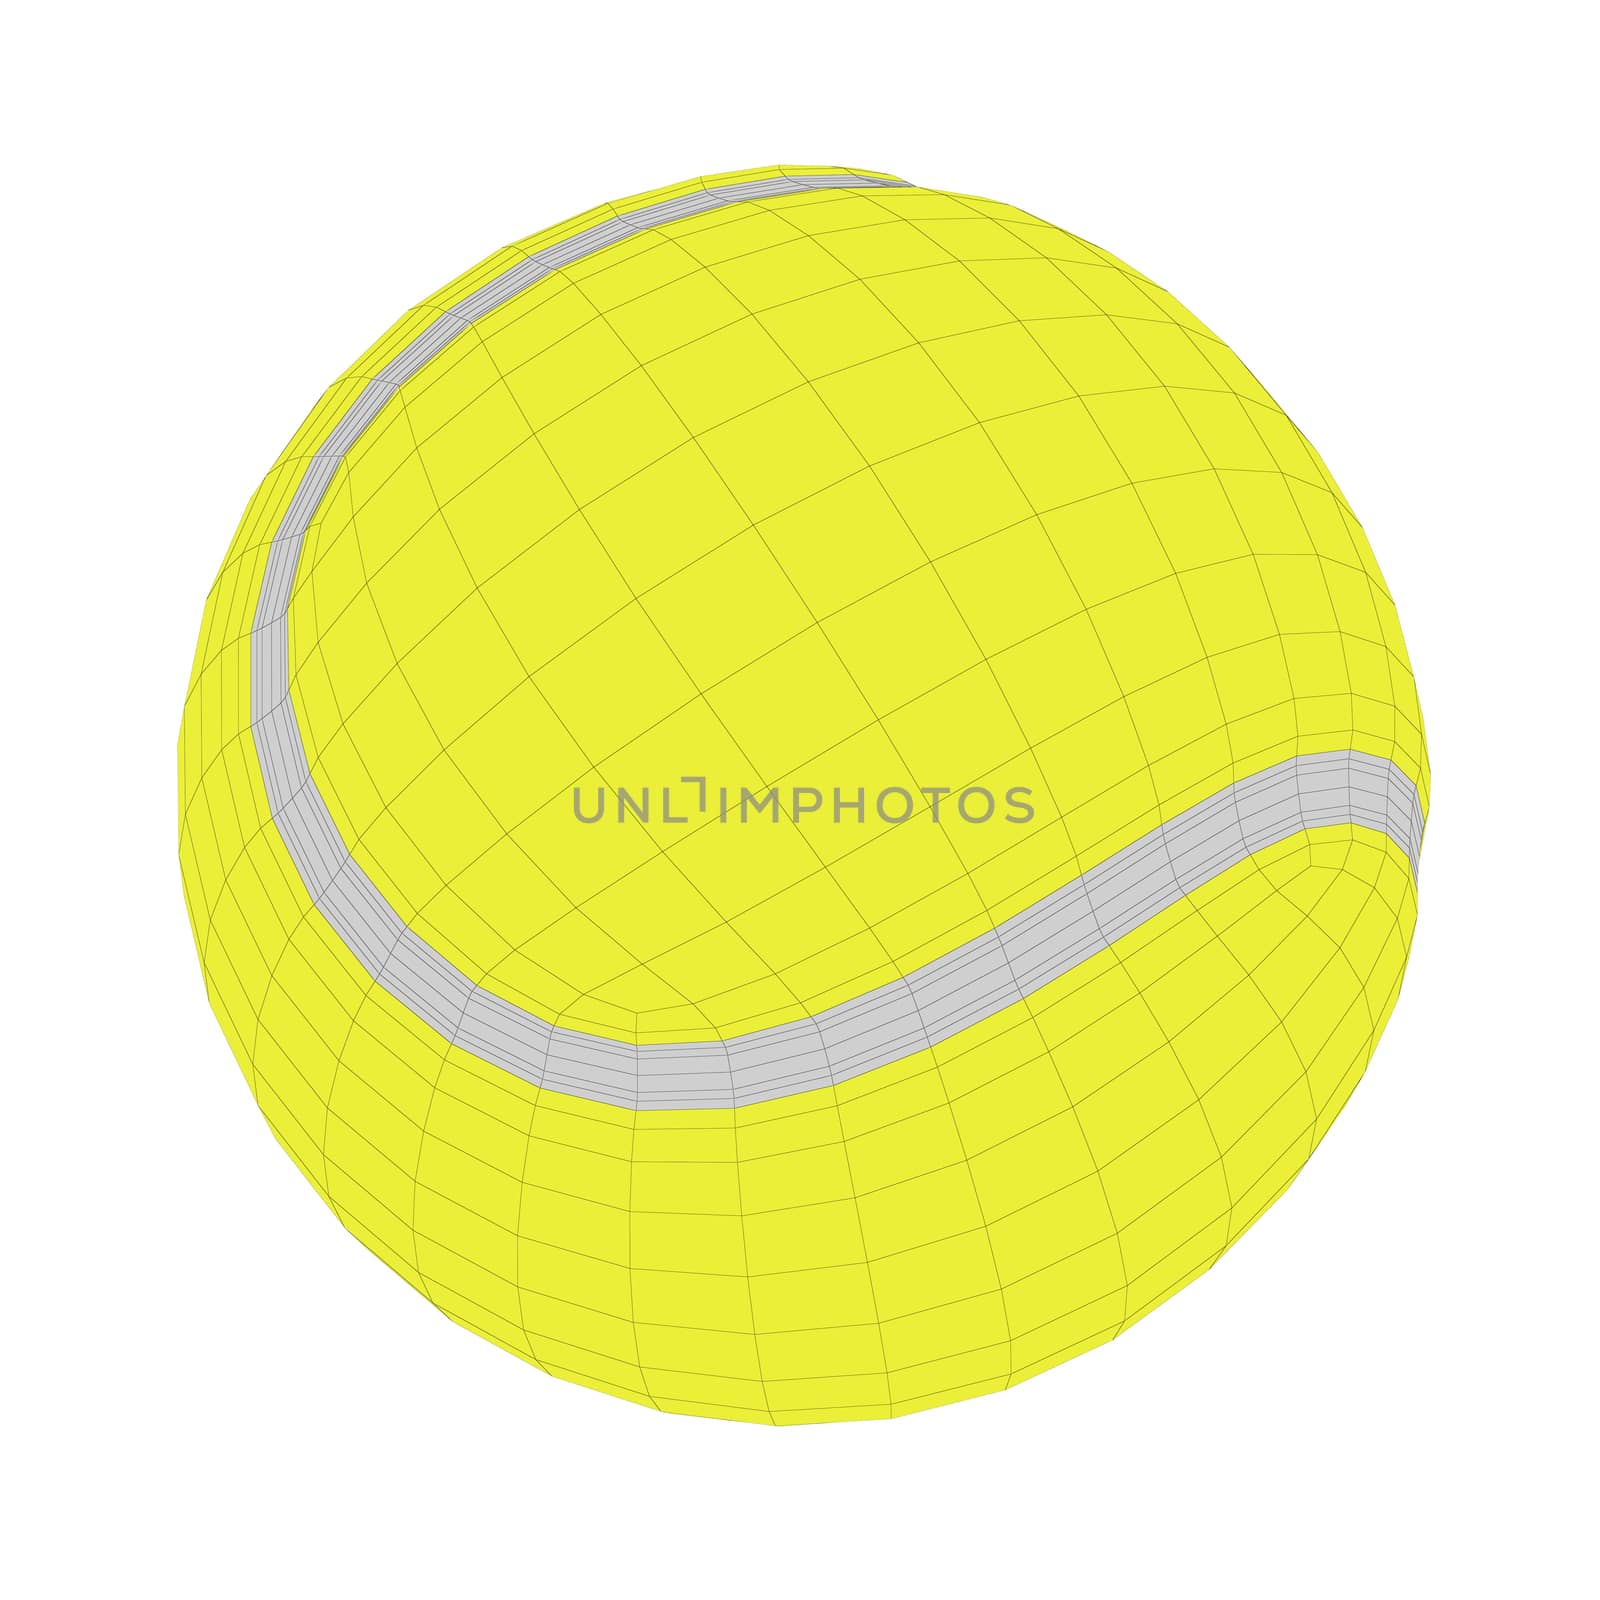 3D wire-frame model of tennis ball by magraphics